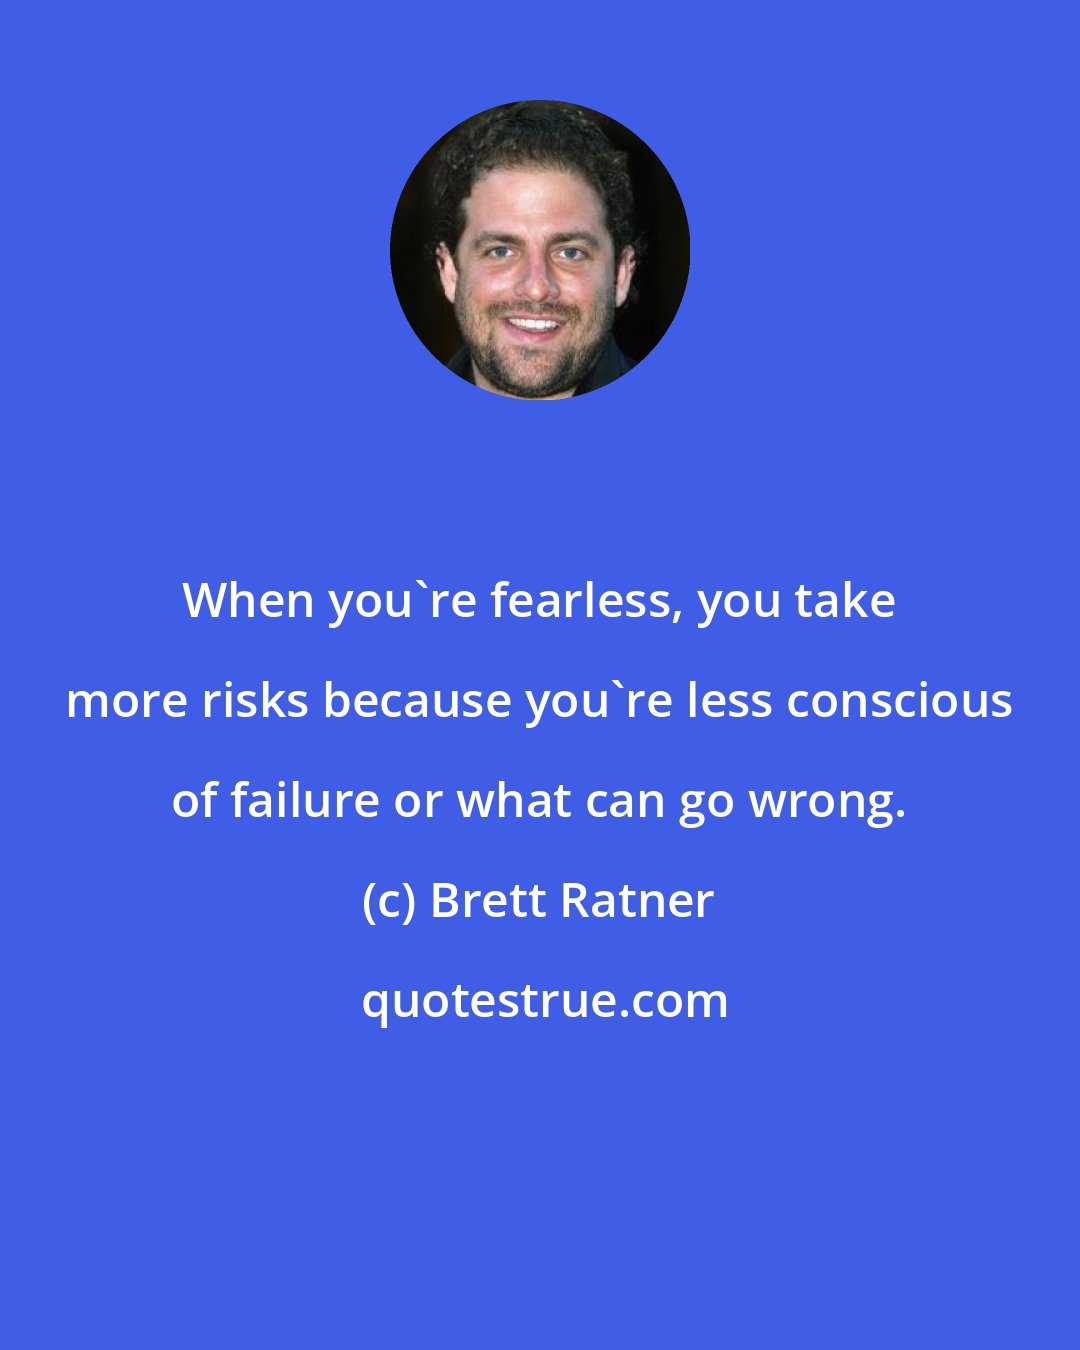 Brett Ratner: When you're fearless, you take more risks because you're less conscious of failure or what can go wrong.